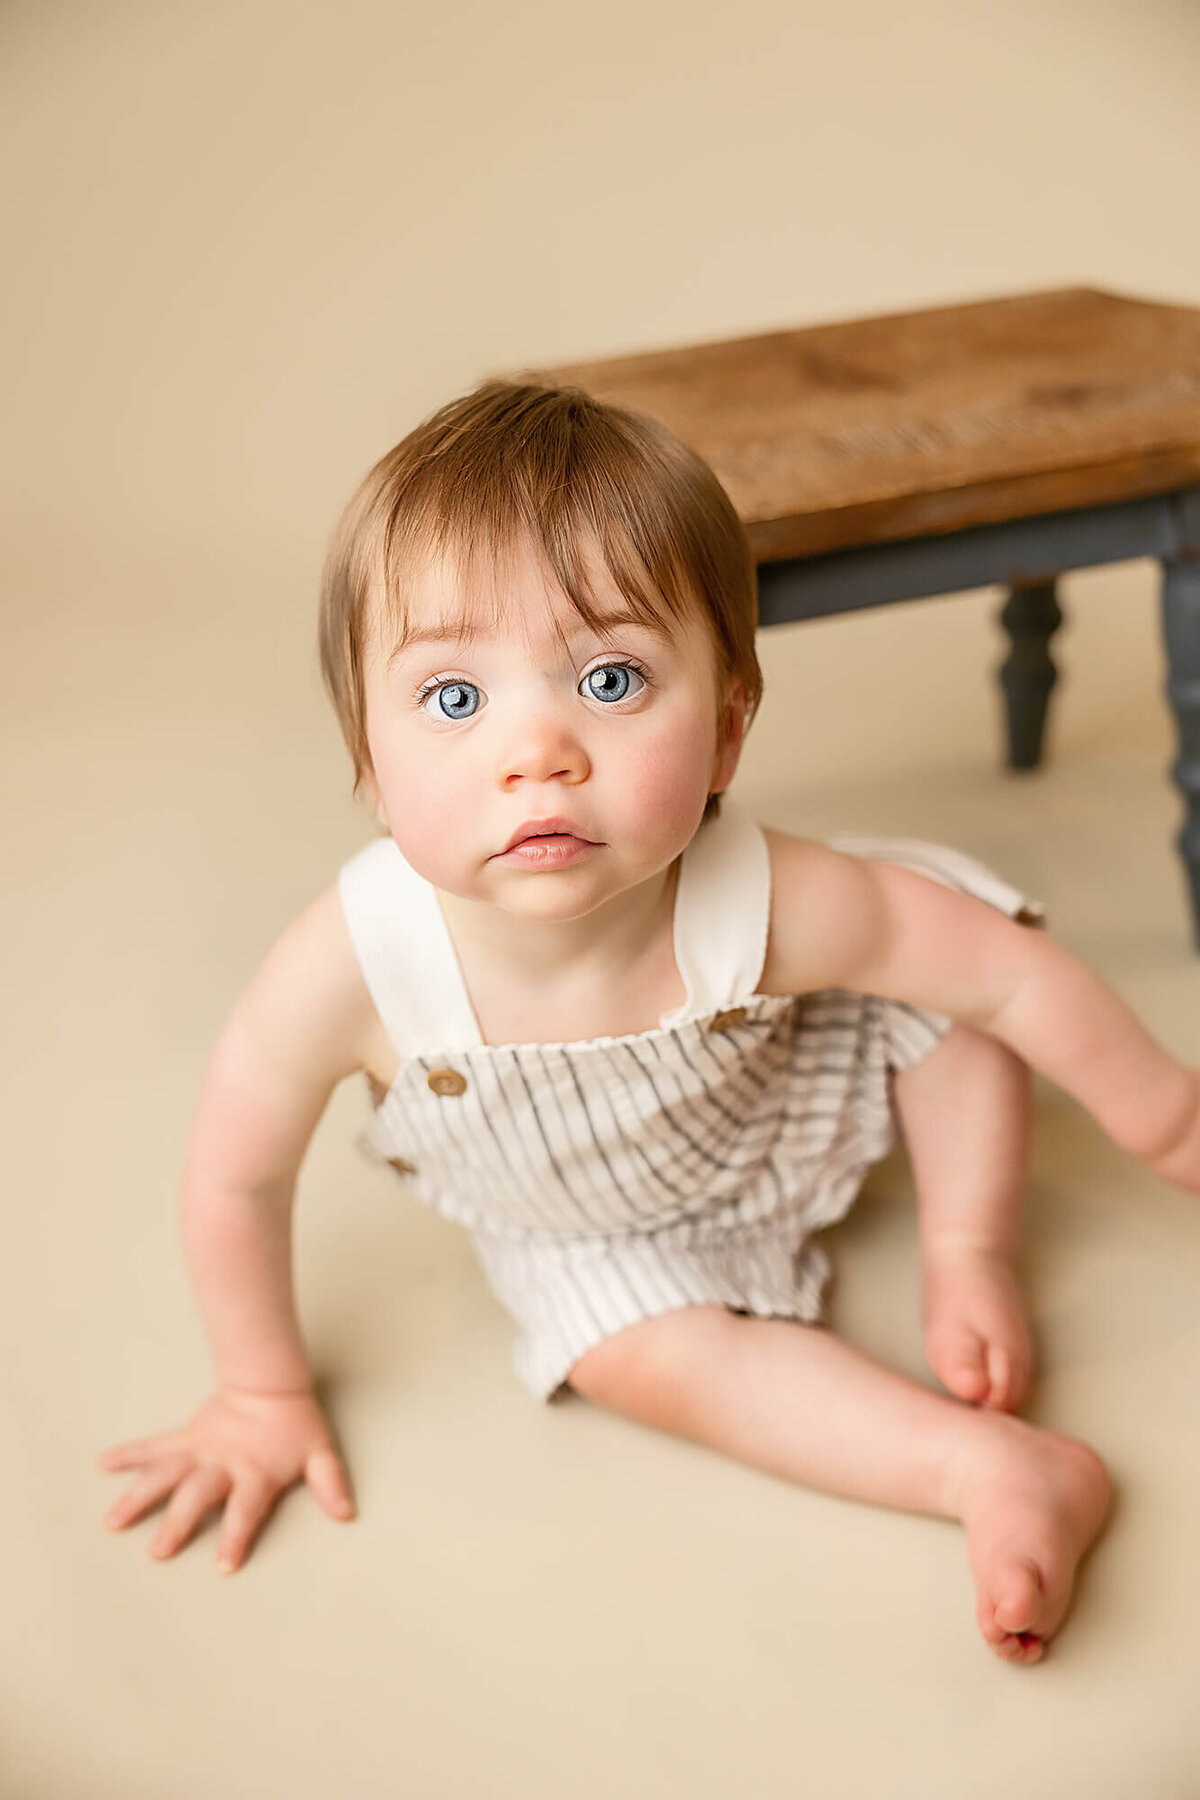 One year old with beautiful blue eyes.